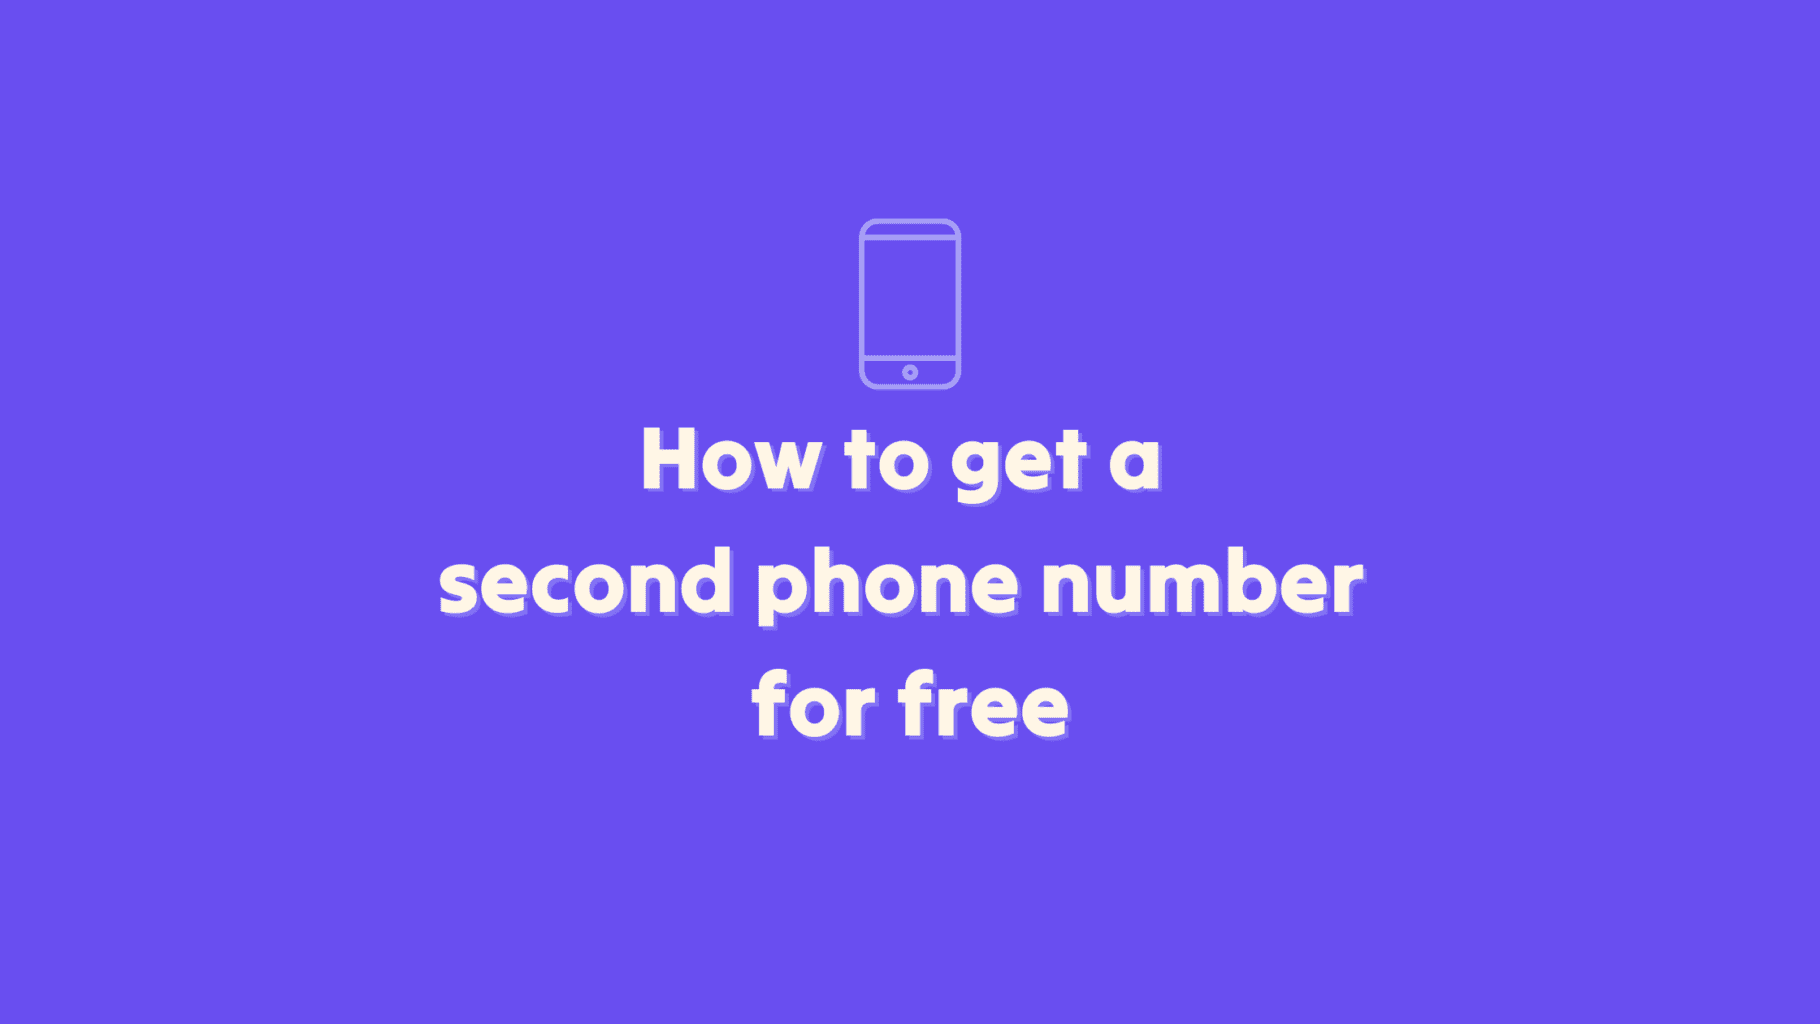 How To Get A Second Phone Number For Free